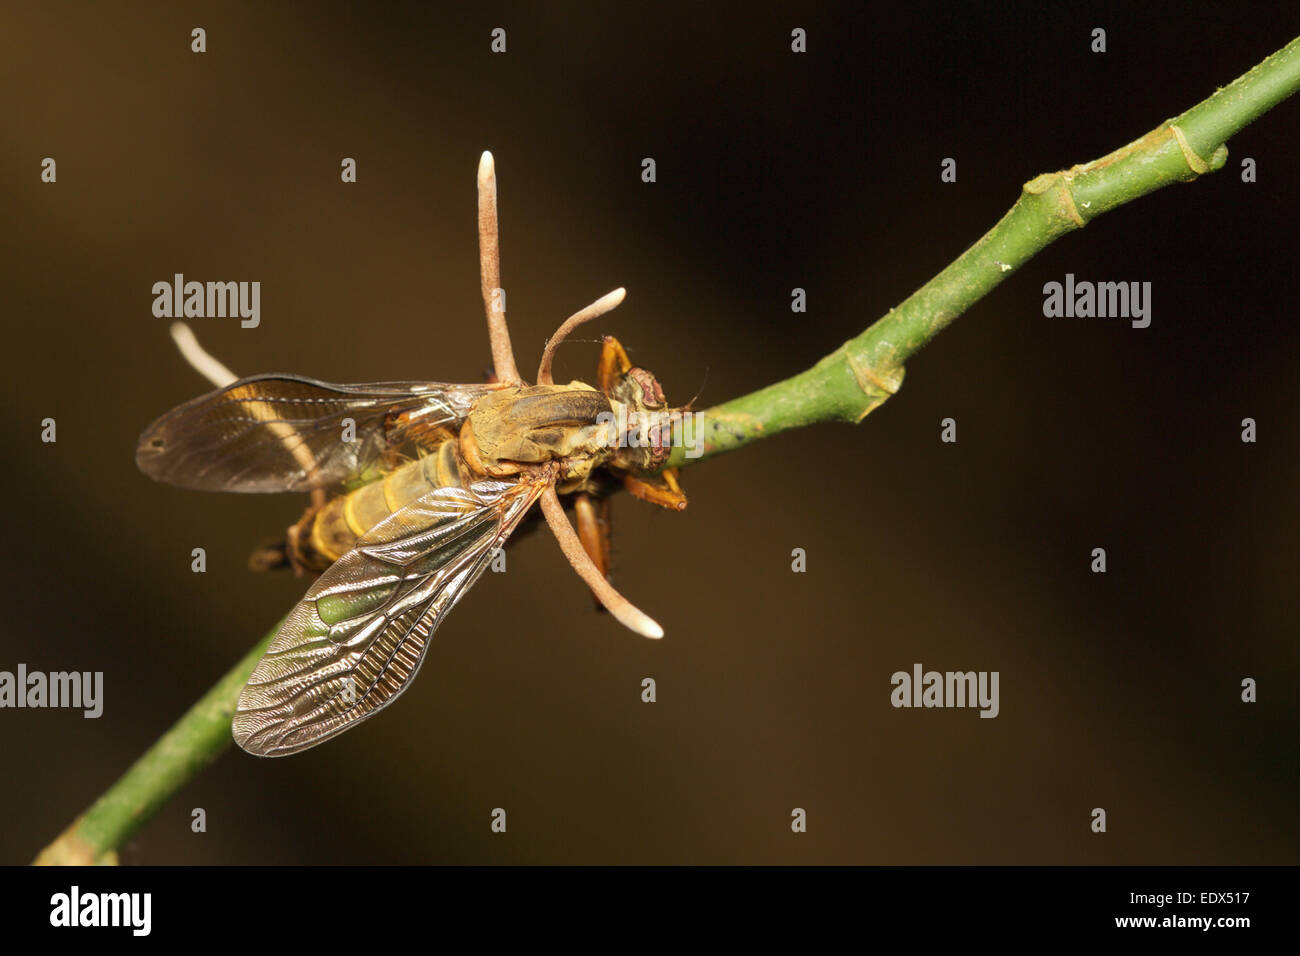 Hymenostilbe dipterigena is a fungi that Infects dipteran flies. Seen here after killing a host Asilidae robber fly. Stock Photo